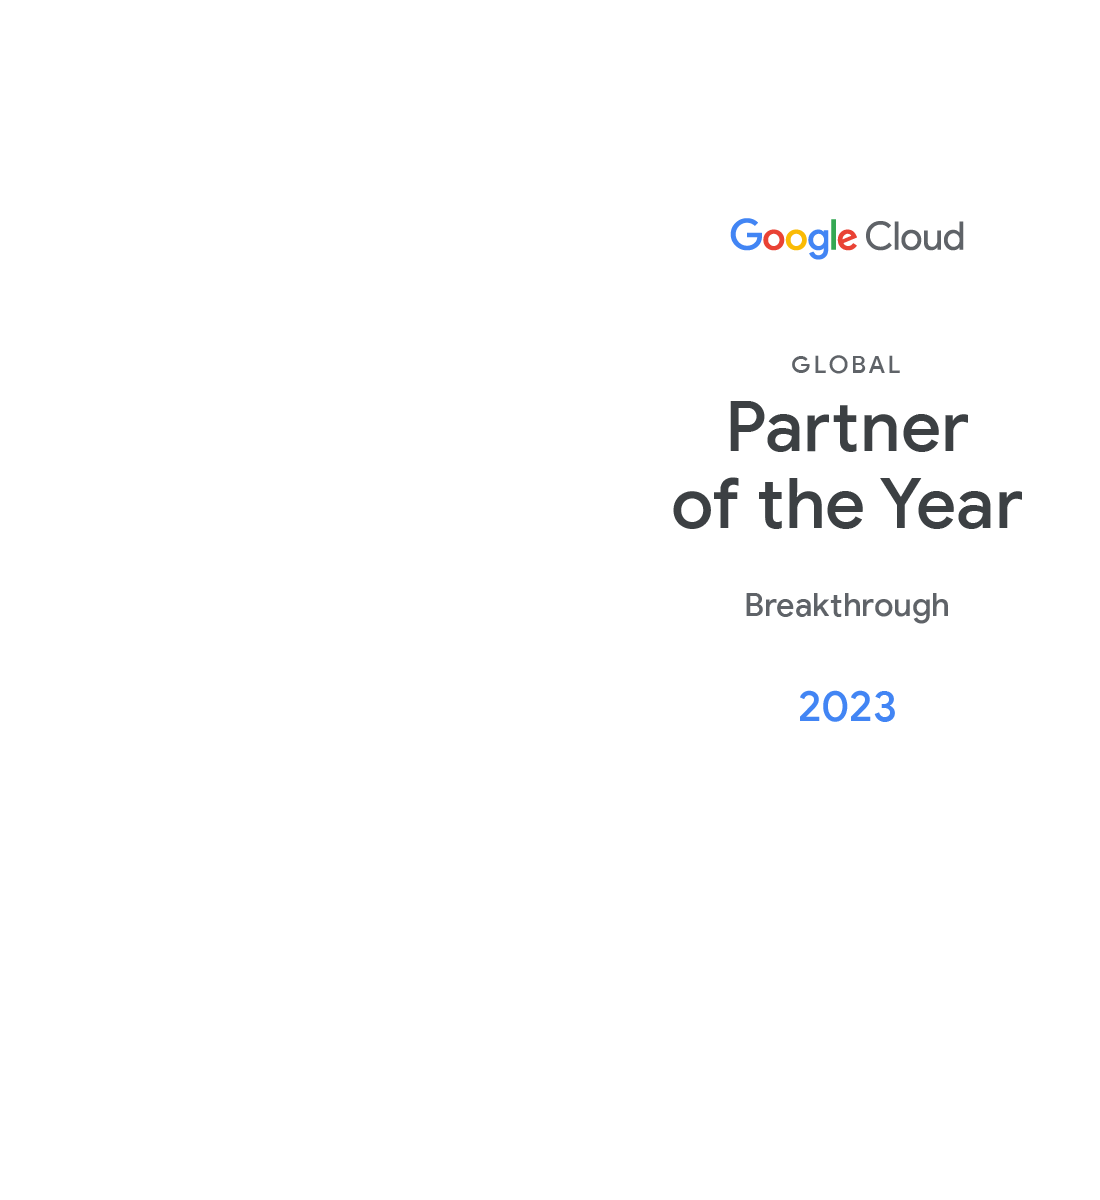 Google Cloud Global Partner of the Year 2023